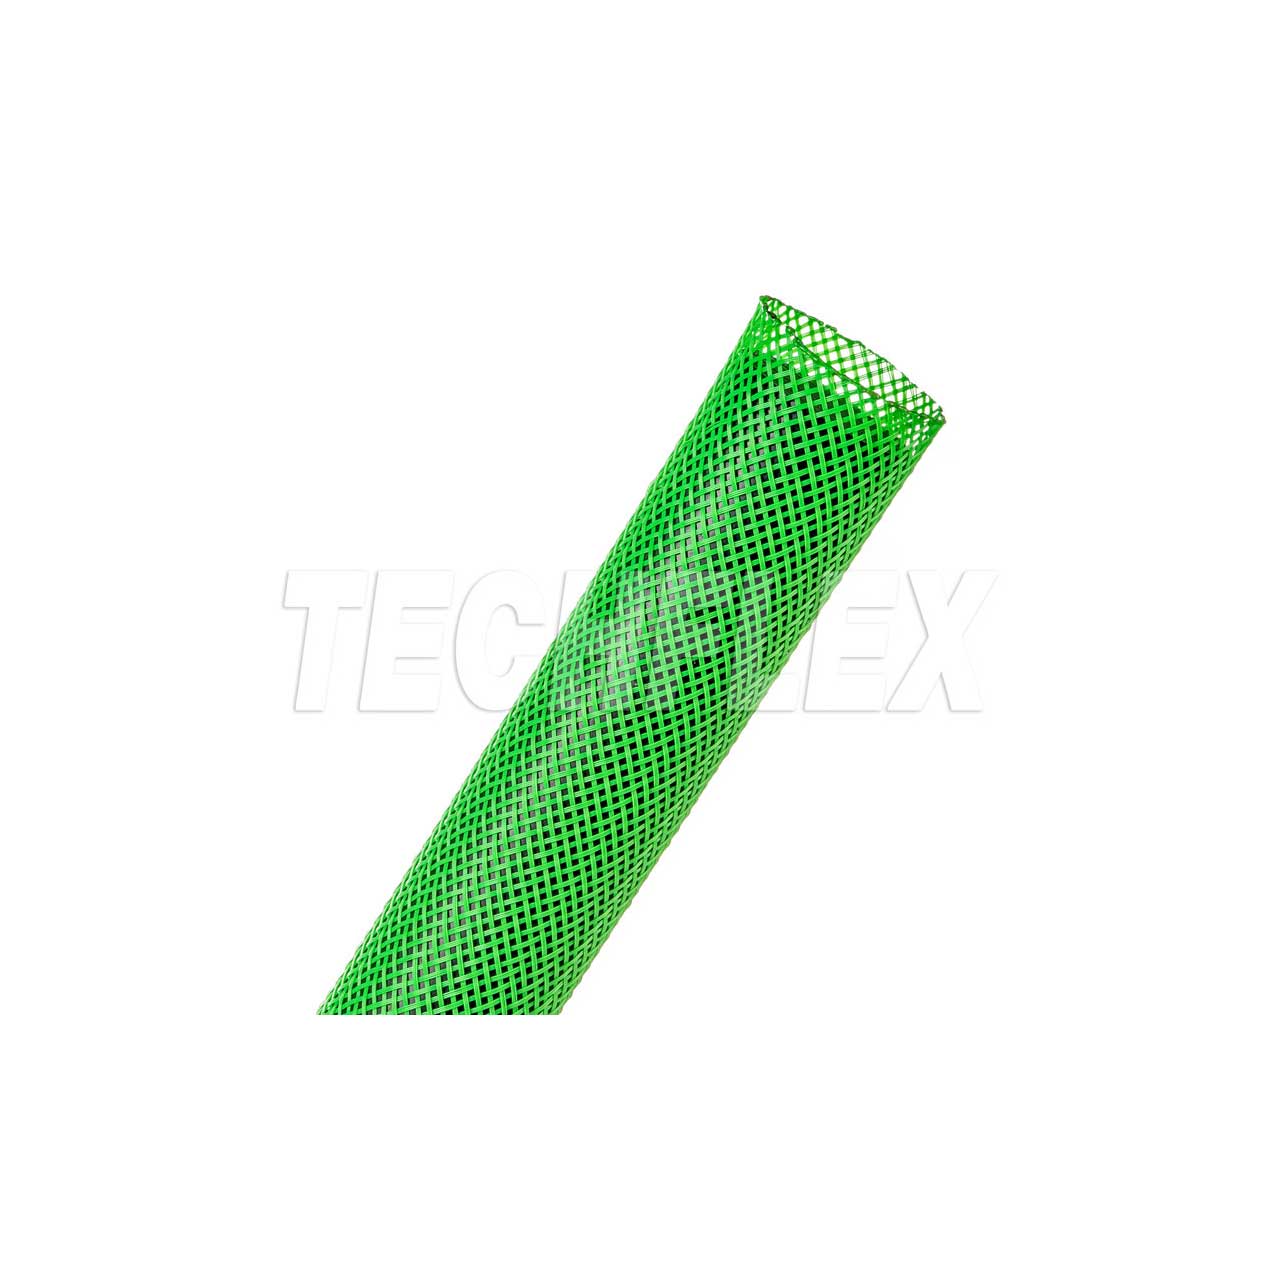 Techflex PTN1.00 General Purpose Expandable Braided 1 Inch Sleeving - Neon Green - 250 Foot